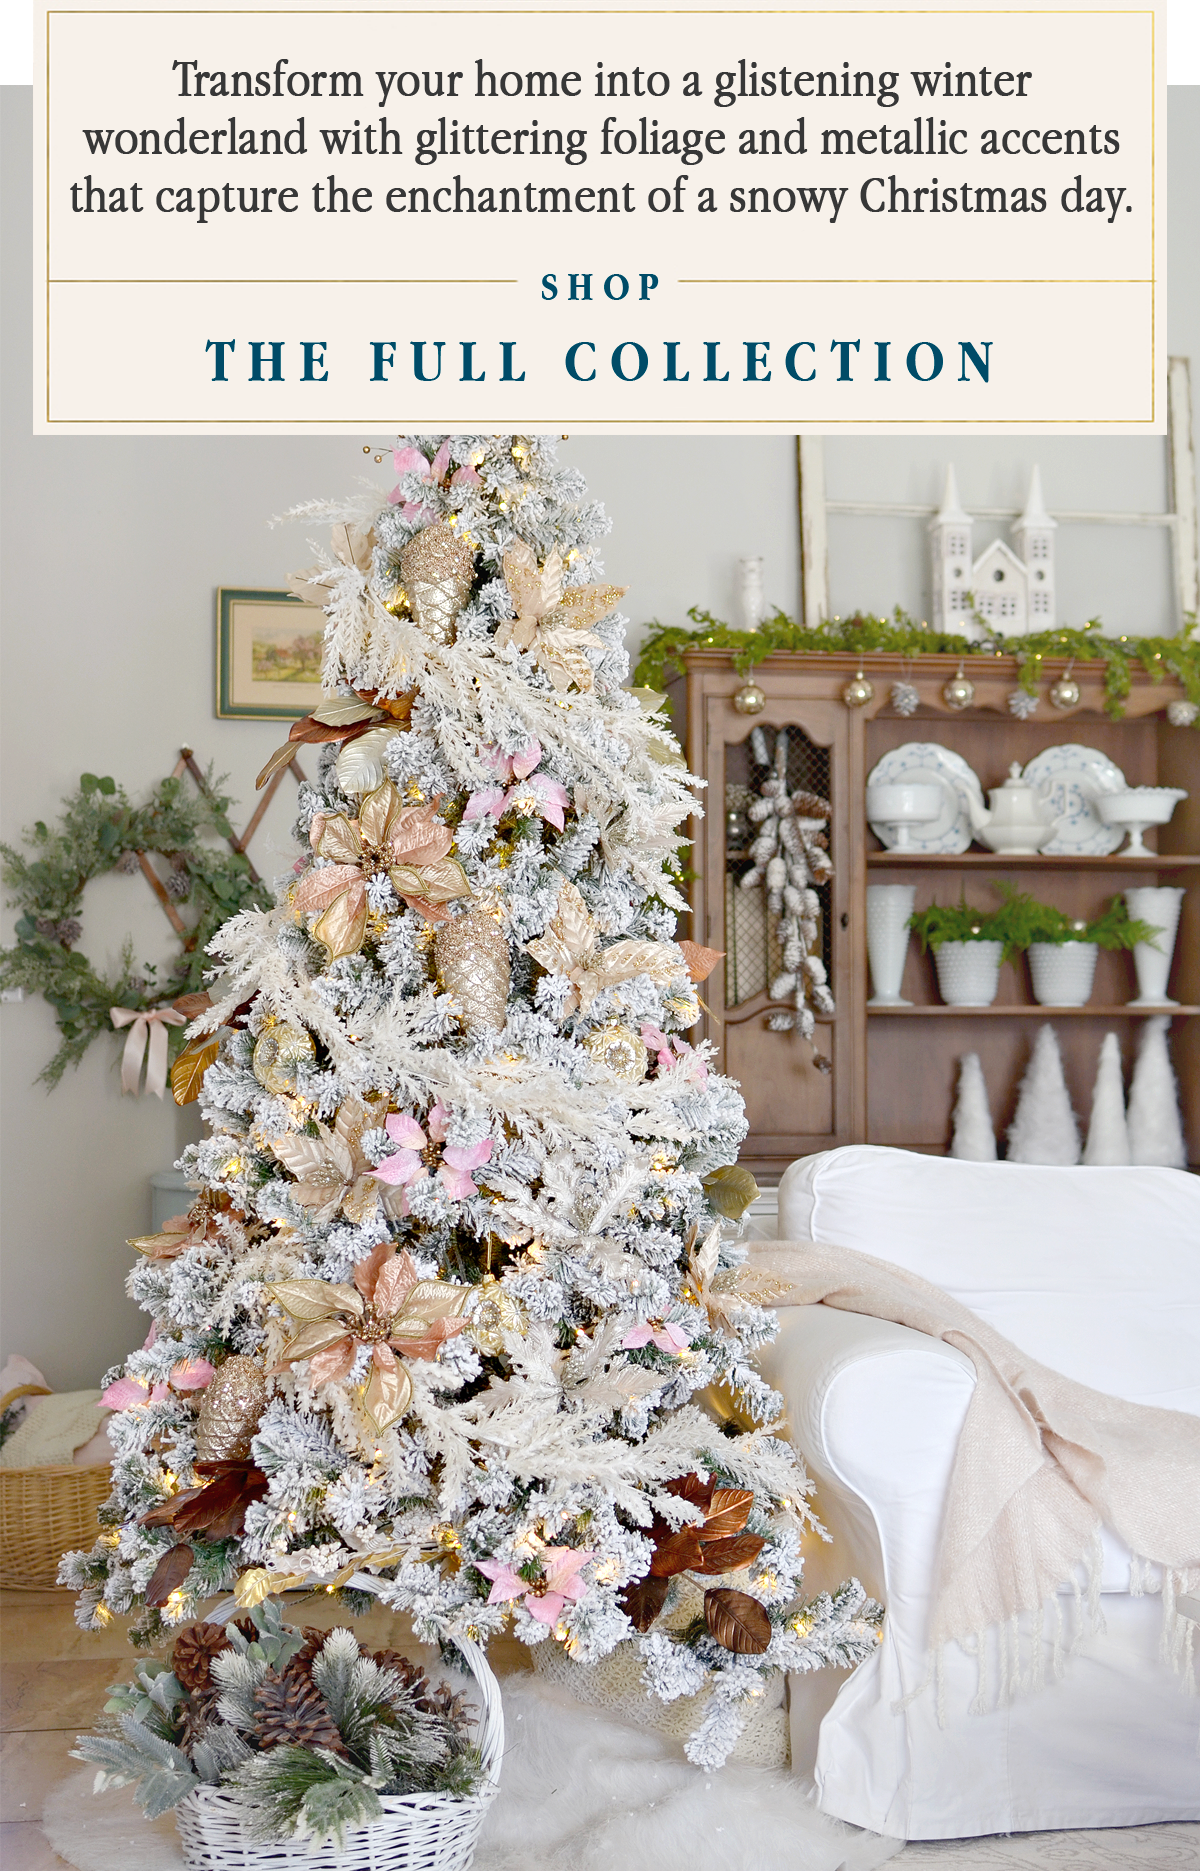 Transform your home into a glistening winter wonderland with glittering foliage and metallic accents that capture the enchantment of a snowy Christmas day. Shop the full collection.